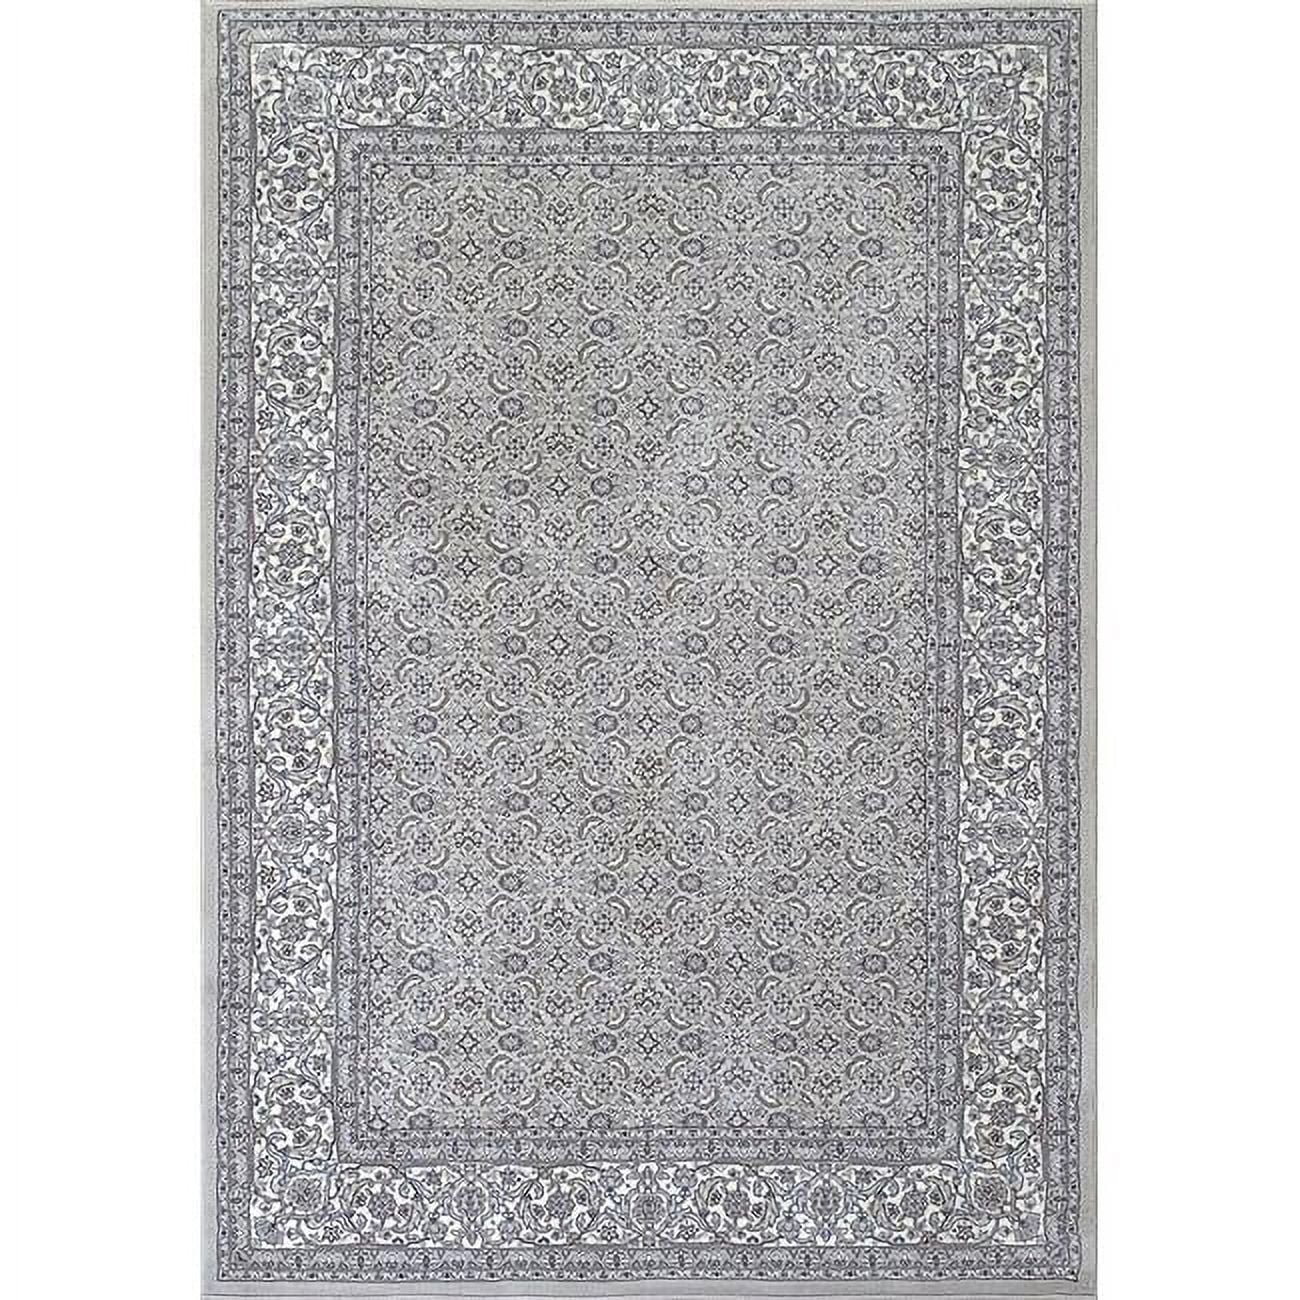 Picture of Dynamic Rugs AN1014570119666 9 ft. x 12 ft. 10 in. Ancient 57011 Rectangle Traditional Rug - 9666 Soft Grey & Cream